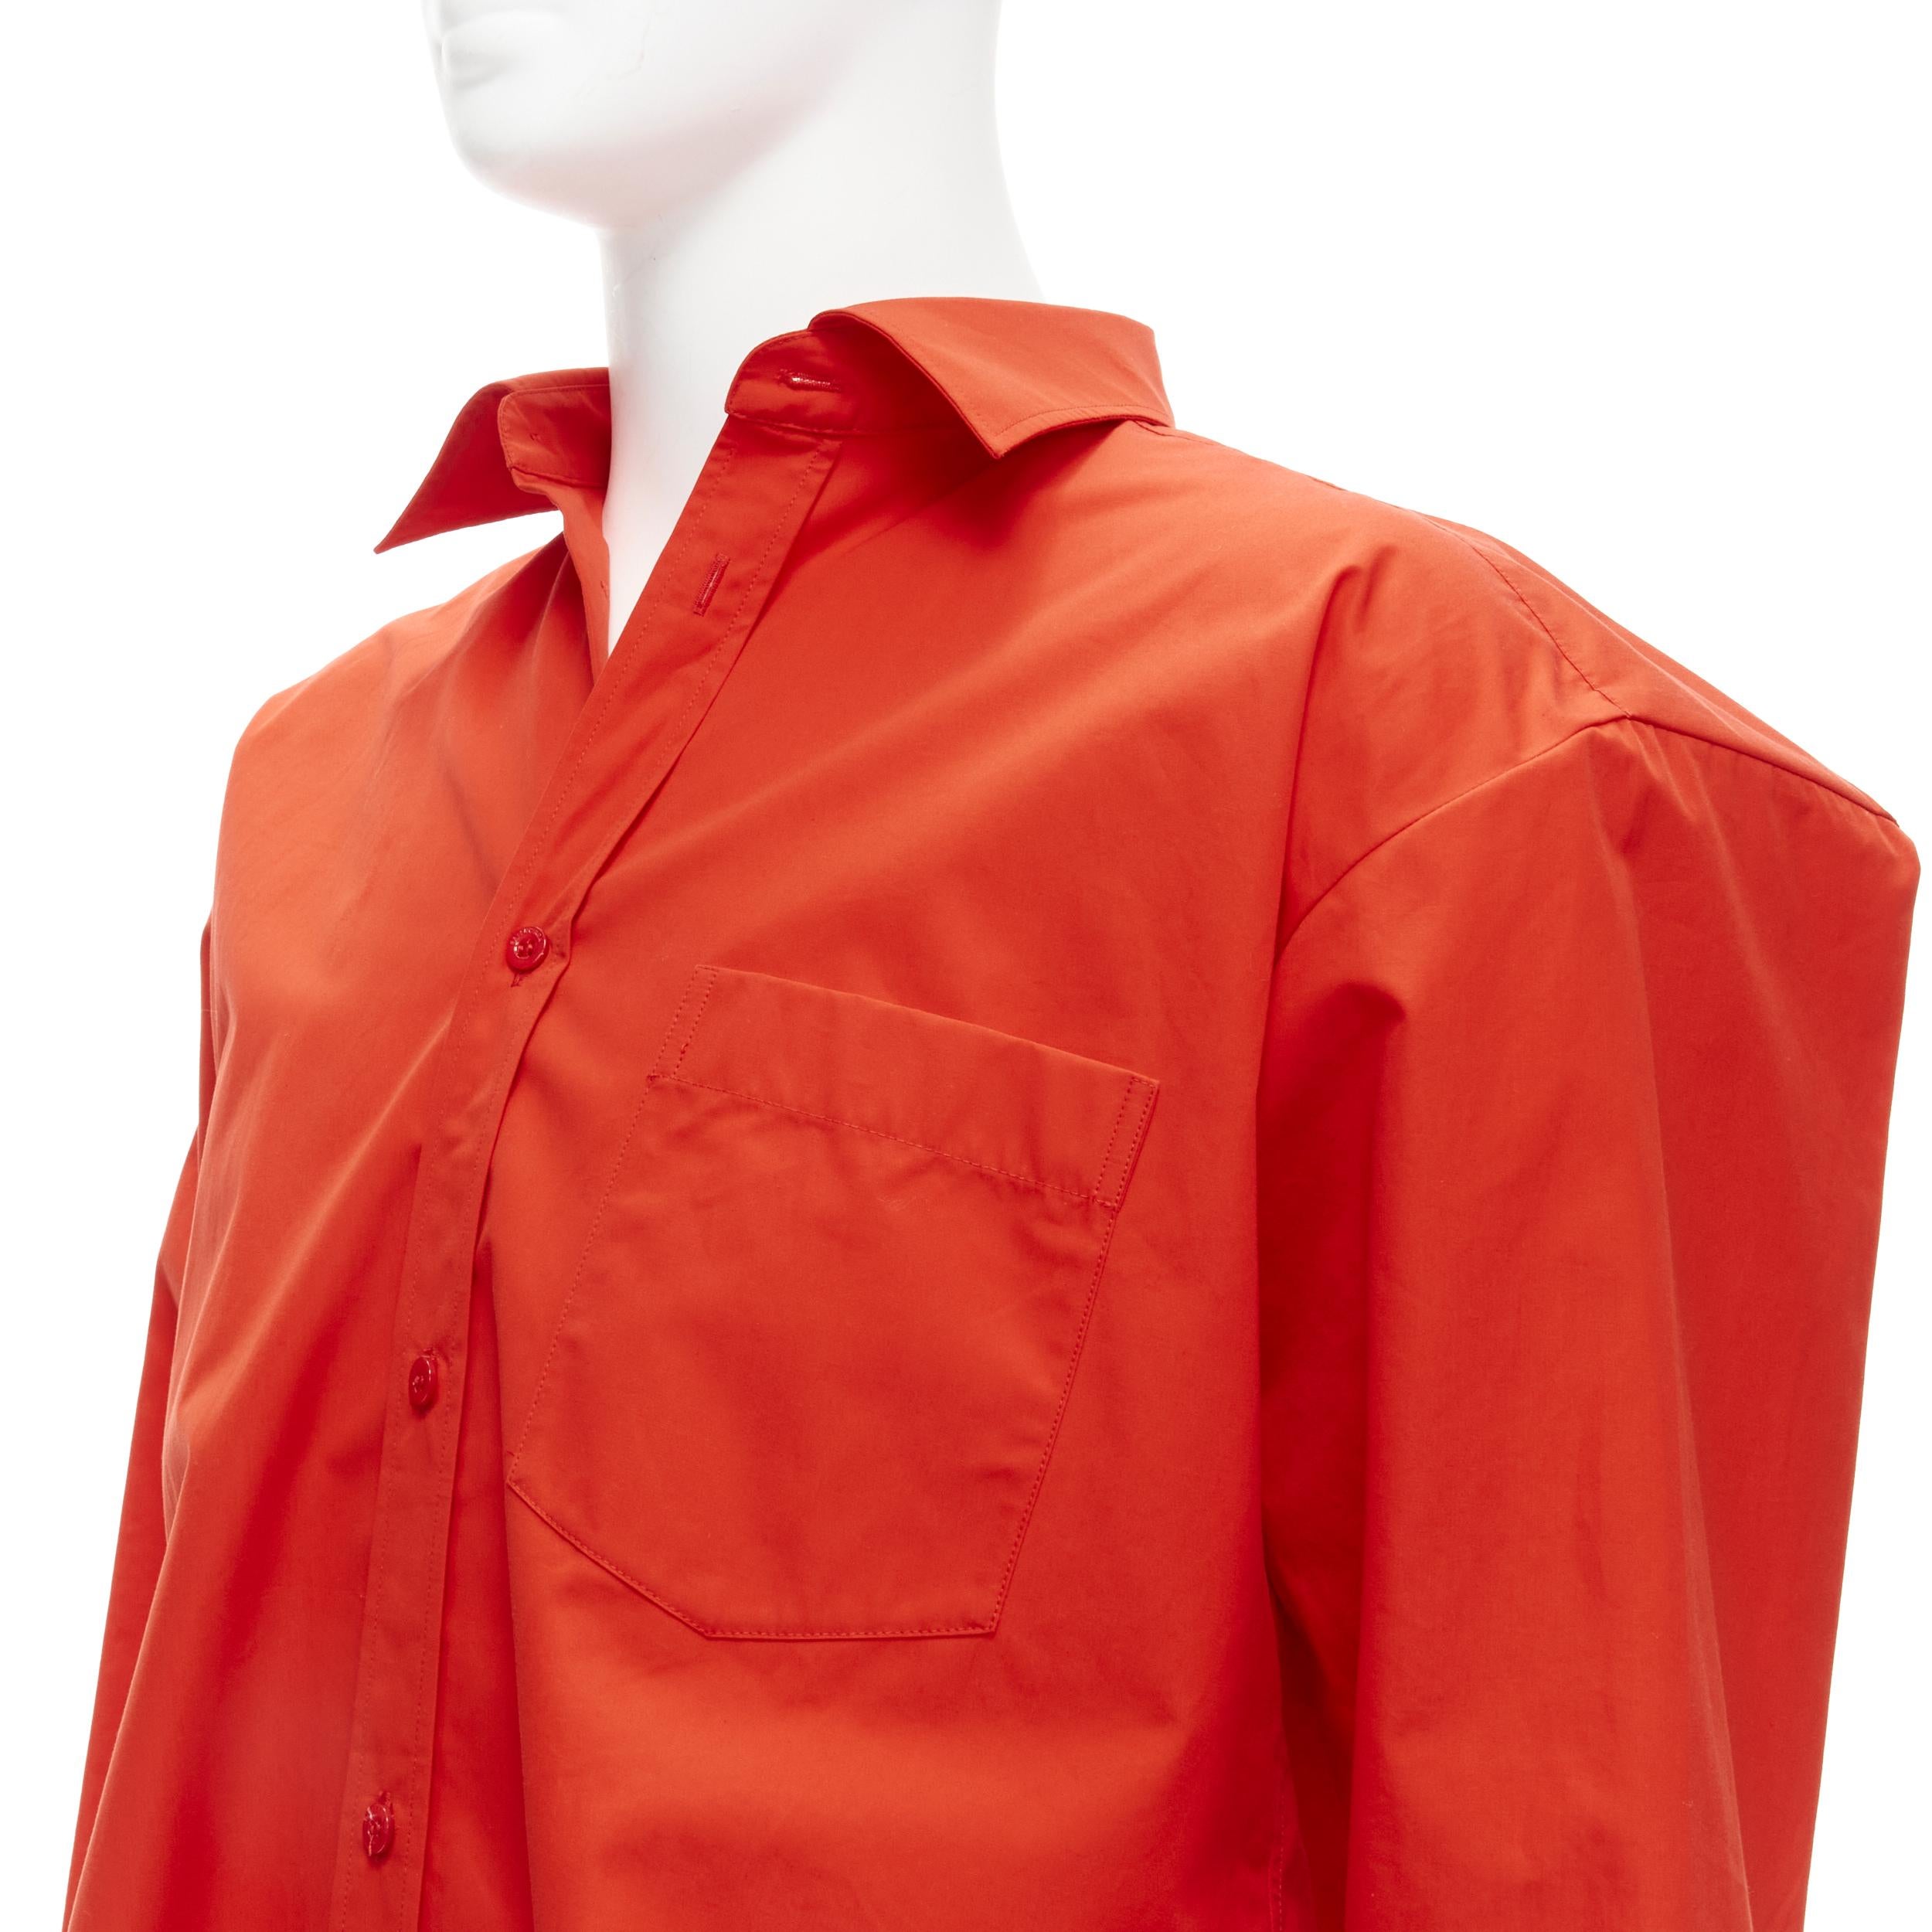 BALENCIAGA Cocoon red swing collar 3D cut oversized button down shirt
Reference: CNLE/A00185
Brand: Balenciaga
Designer: Demna
Material: Feels like cotton
Color: Red
Pattern: Solid
Closure: Button
Extra Details: 3D swing collar